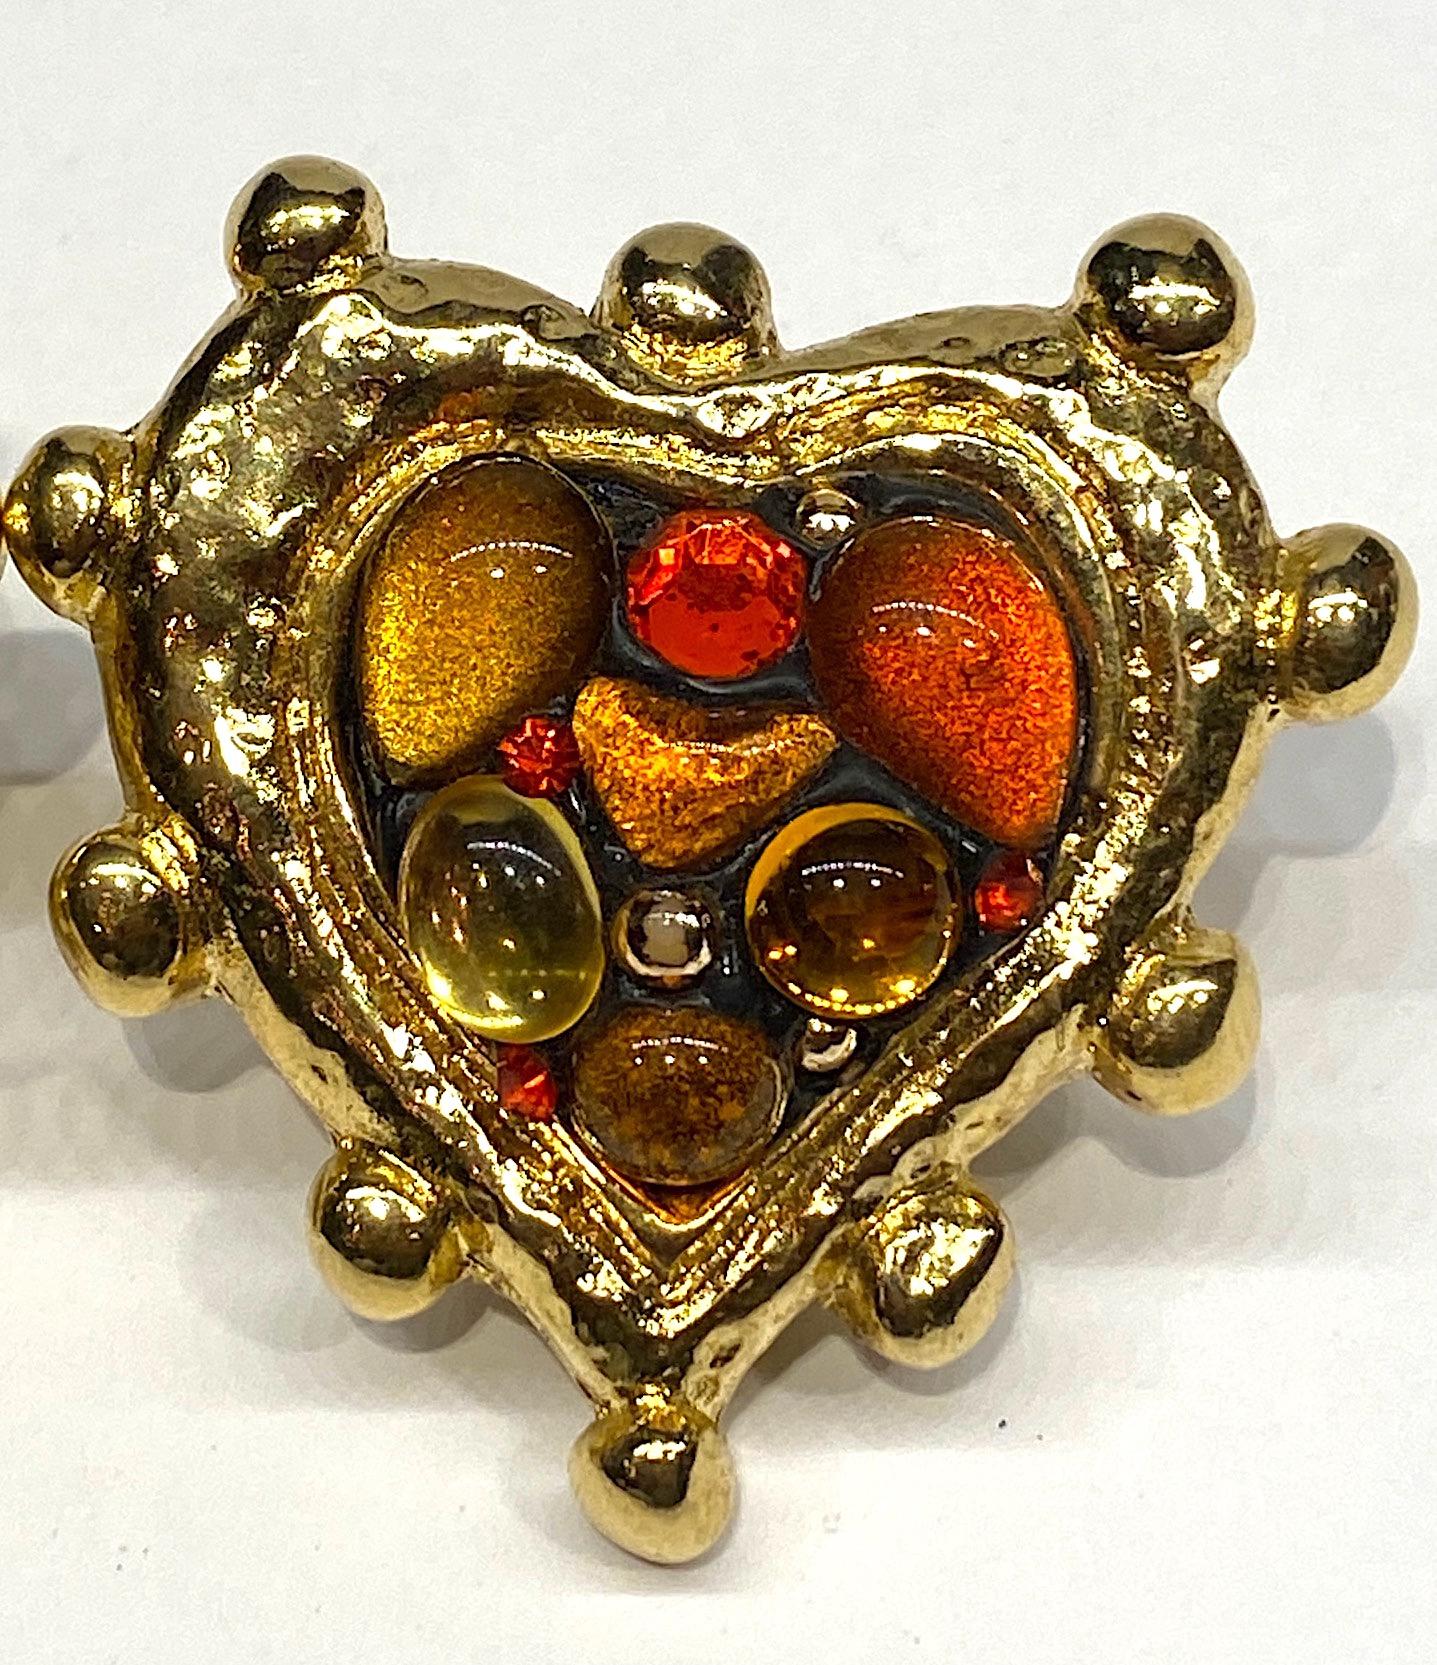 A fabulous 1980s pair of statement large heart shape earrings by French fashion jewelry designer Jacky de G of Paris. The earrings are comprised of a resin interior, for lightness, that is metal covered and gilded. The interior is set with gold and